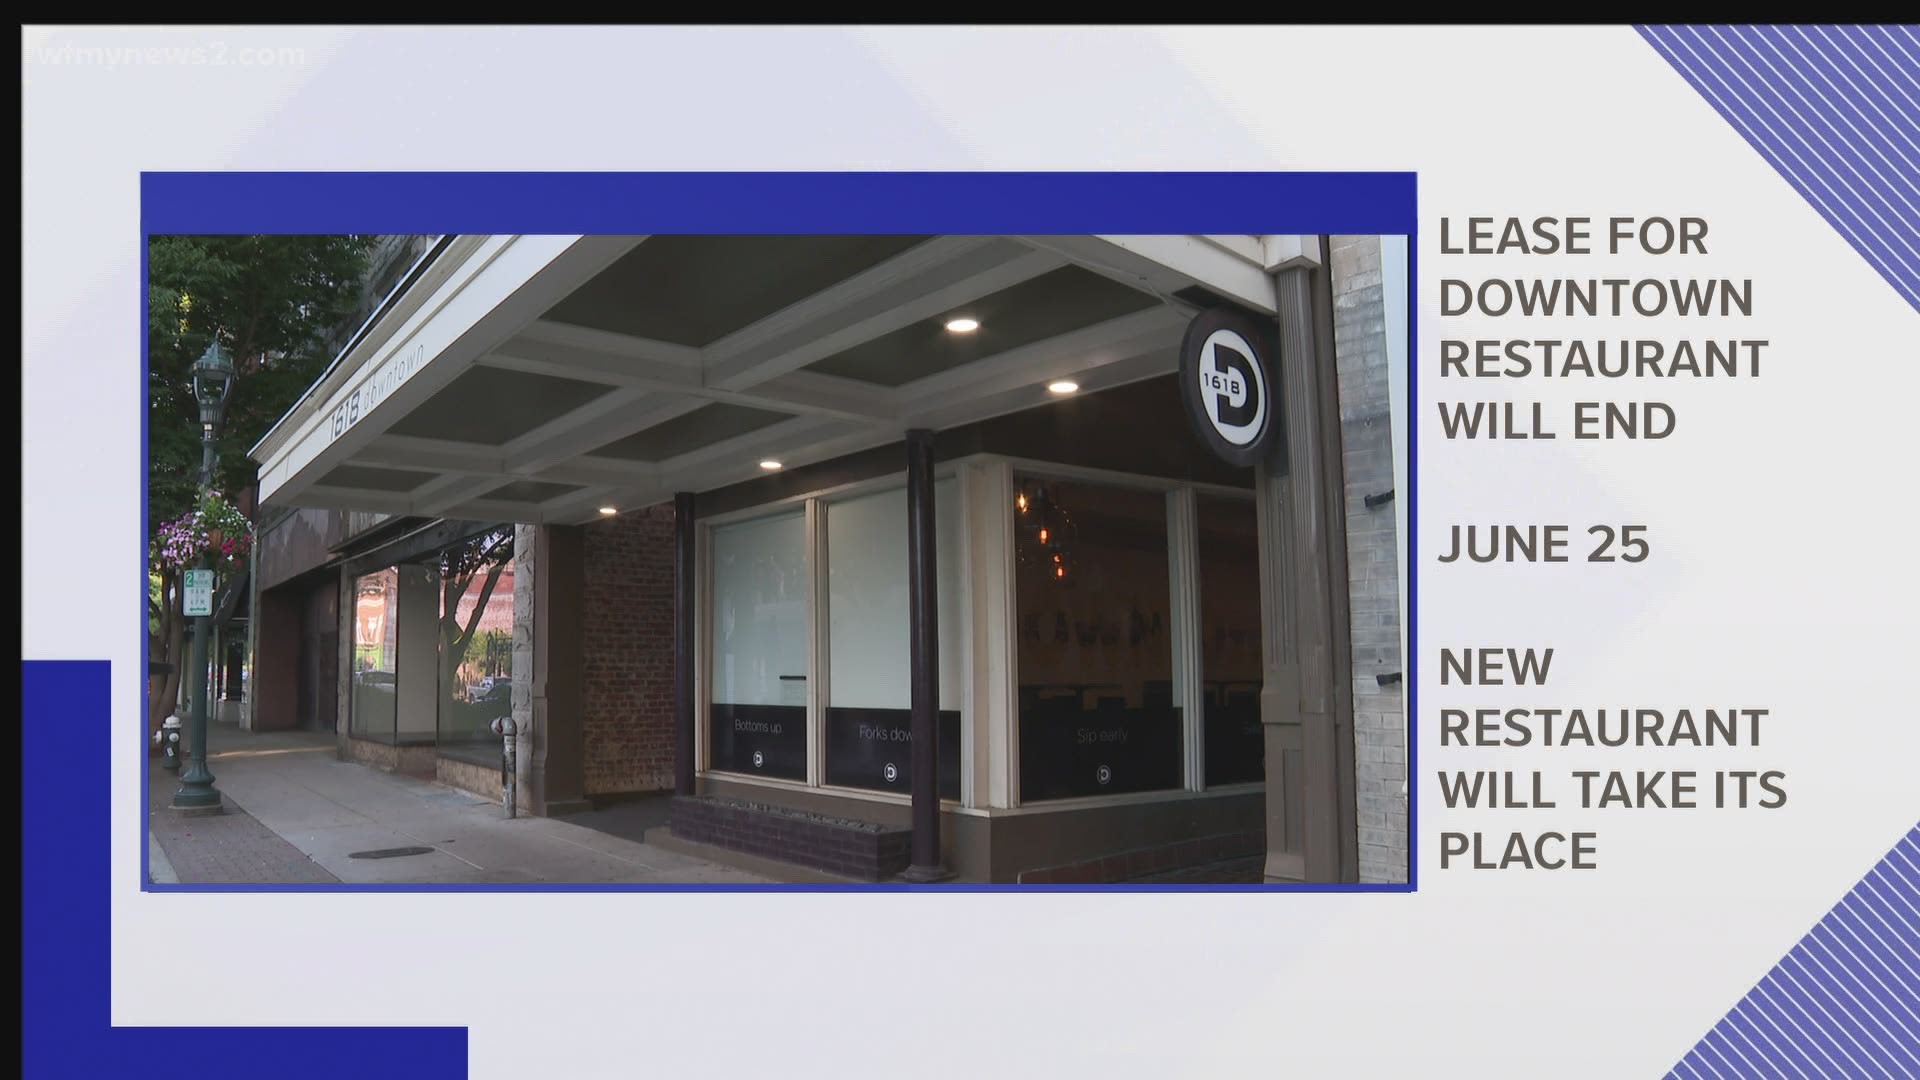 The owners said their lease downtown is up, but a new restaurant will move into the location.